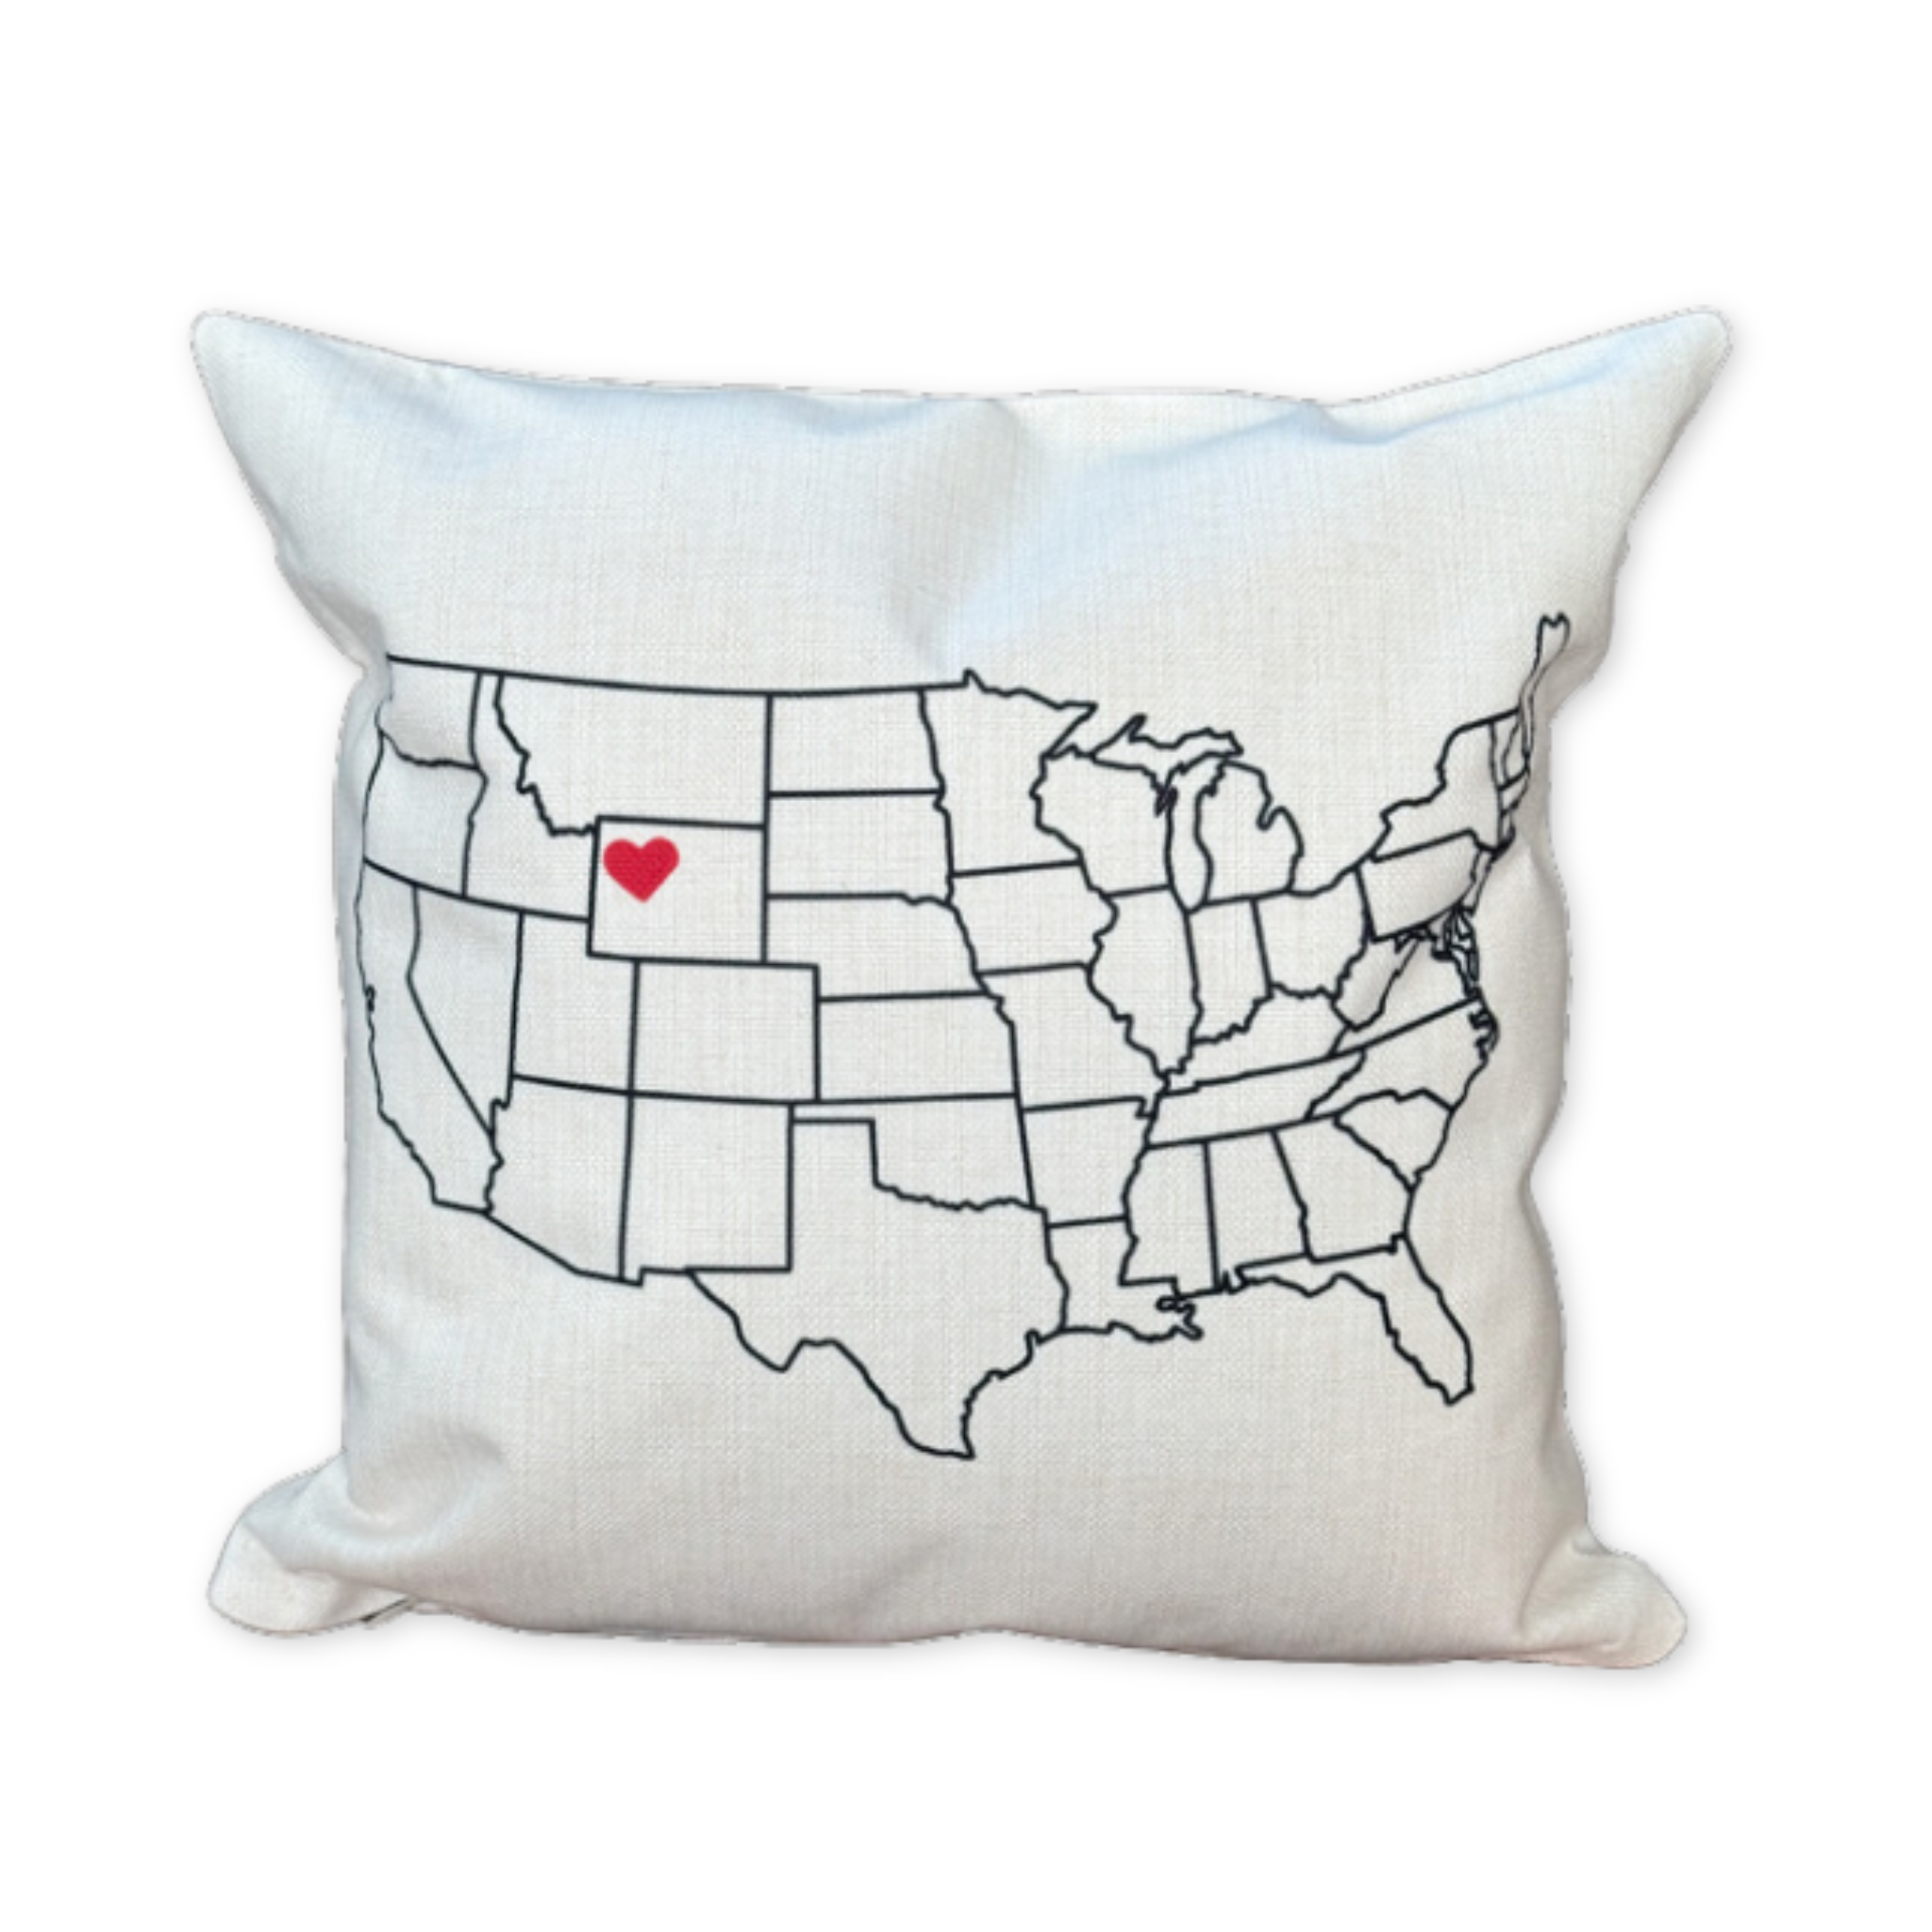 cotton pillow with a map of the united states and a heart icon over jackson hole wyoming